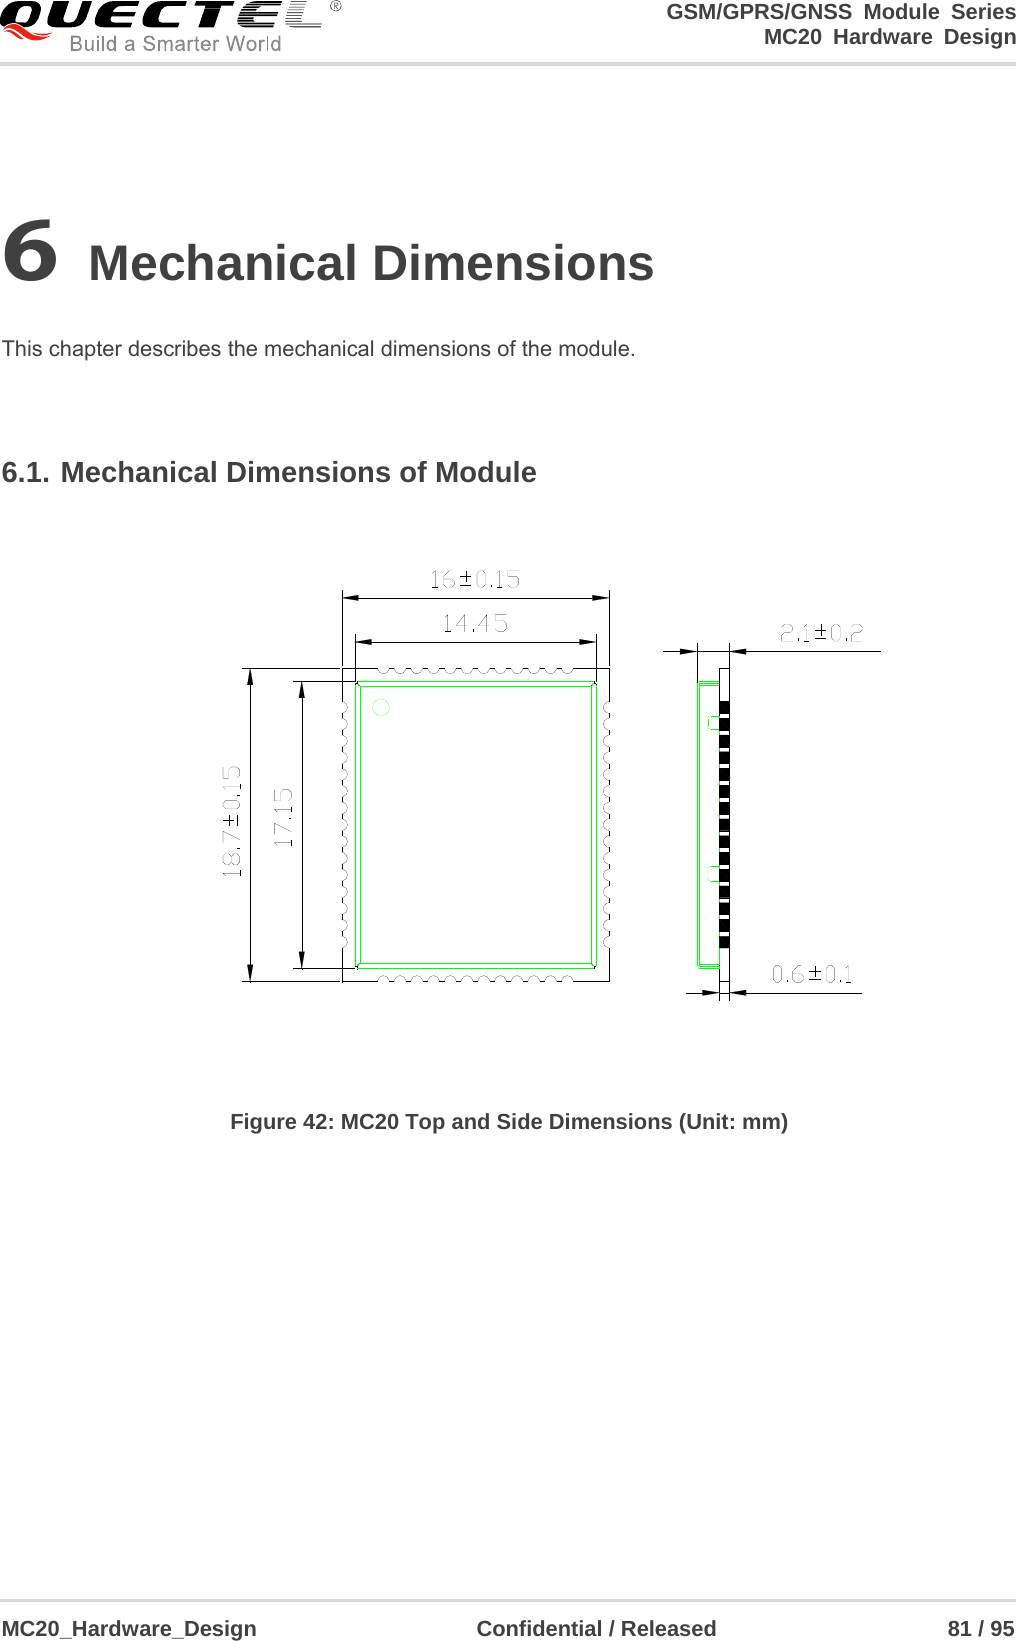                                                                     GSM/GPRS/GNSS Module Series                                                                 MC20 Hardware Design  MC20_Hardware_Design                    Confidential / Released                     81 / 95     6 Mechanical Dimensions  This chapter describes the mechanical dimensions of the module.  6.1. Mechanical Dimensions of Module  Figure 42: MC20 Top and Side Dimensions (Unit: mm)             